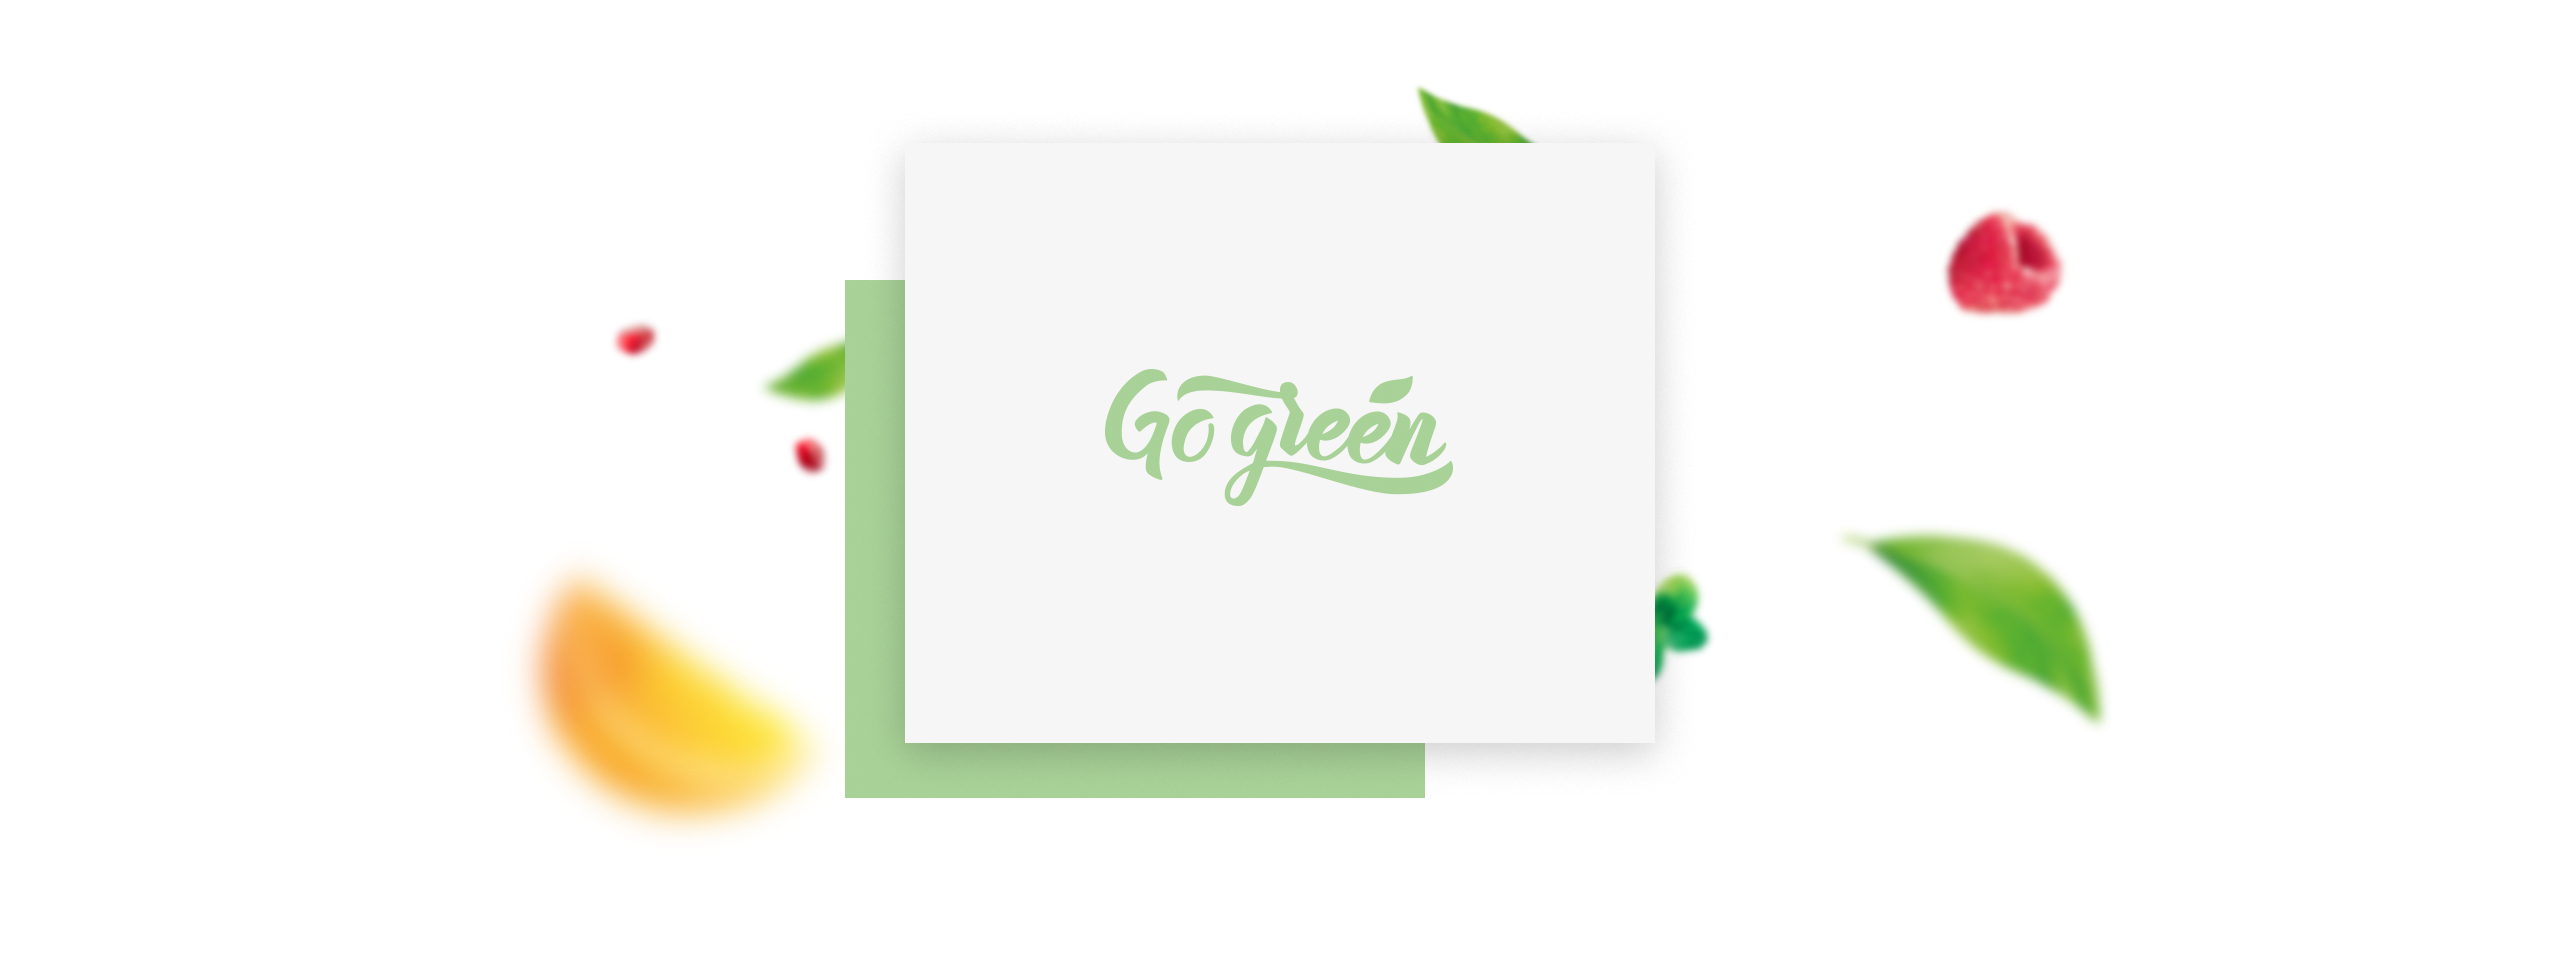 Go green logotype consistent with the brand's philosophy.